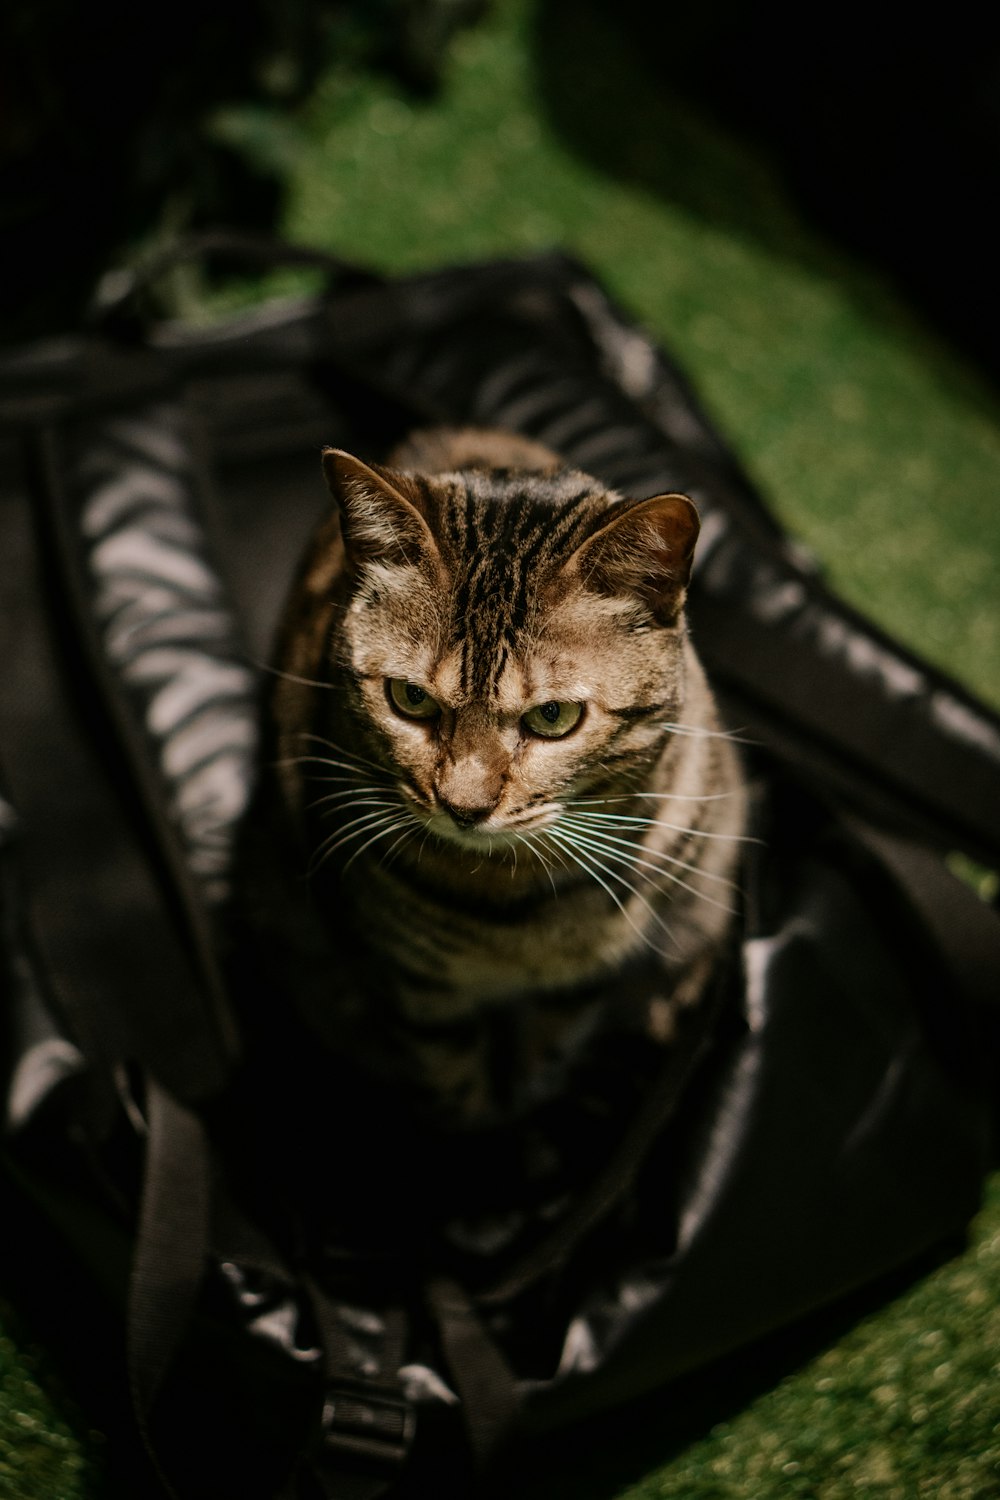 a cat sitting inside of a black bag on the ground